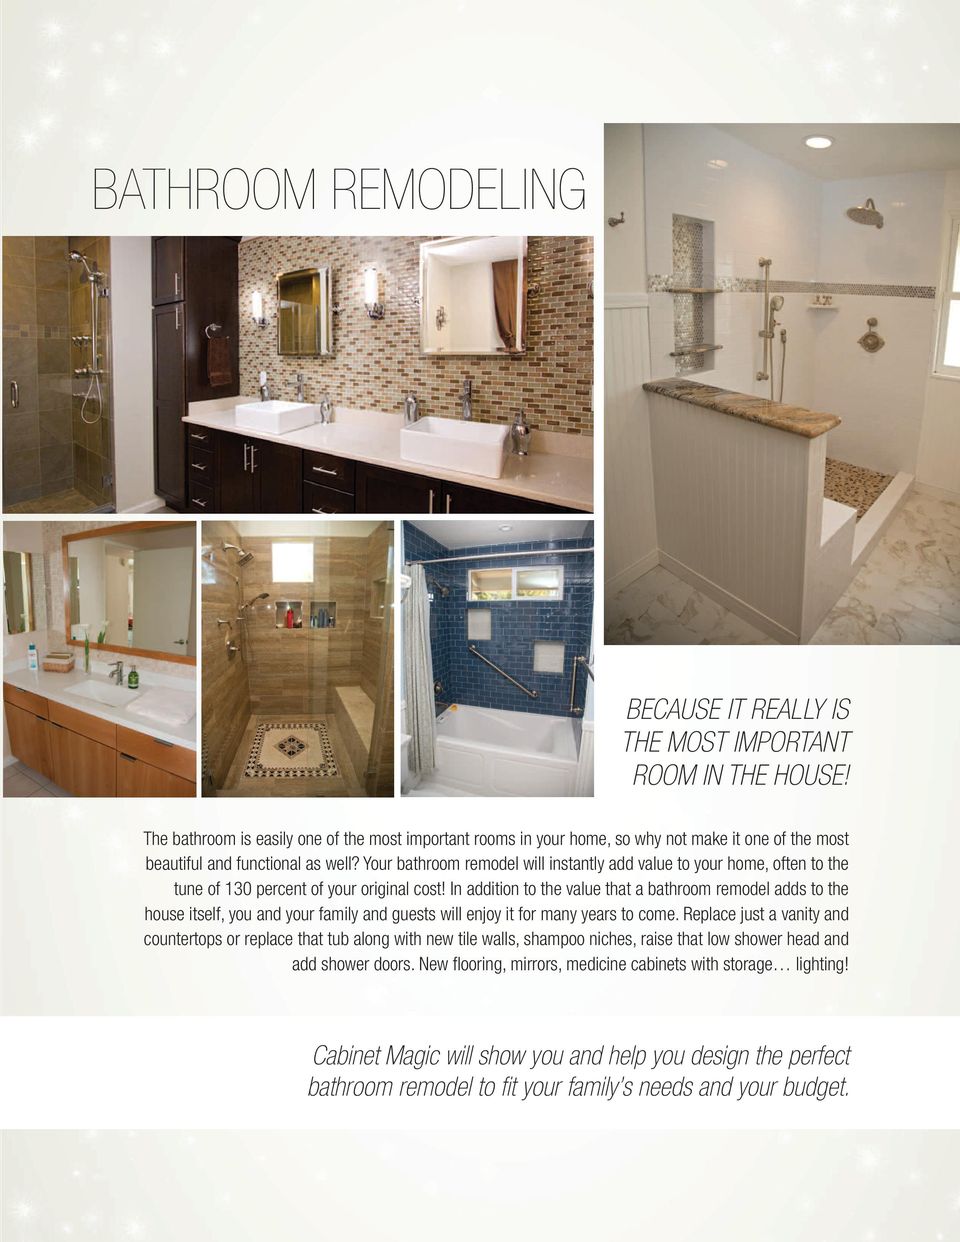 Your bathroom remodel will instantly add value to your home, often to the tune of 130 percent of your original cost!